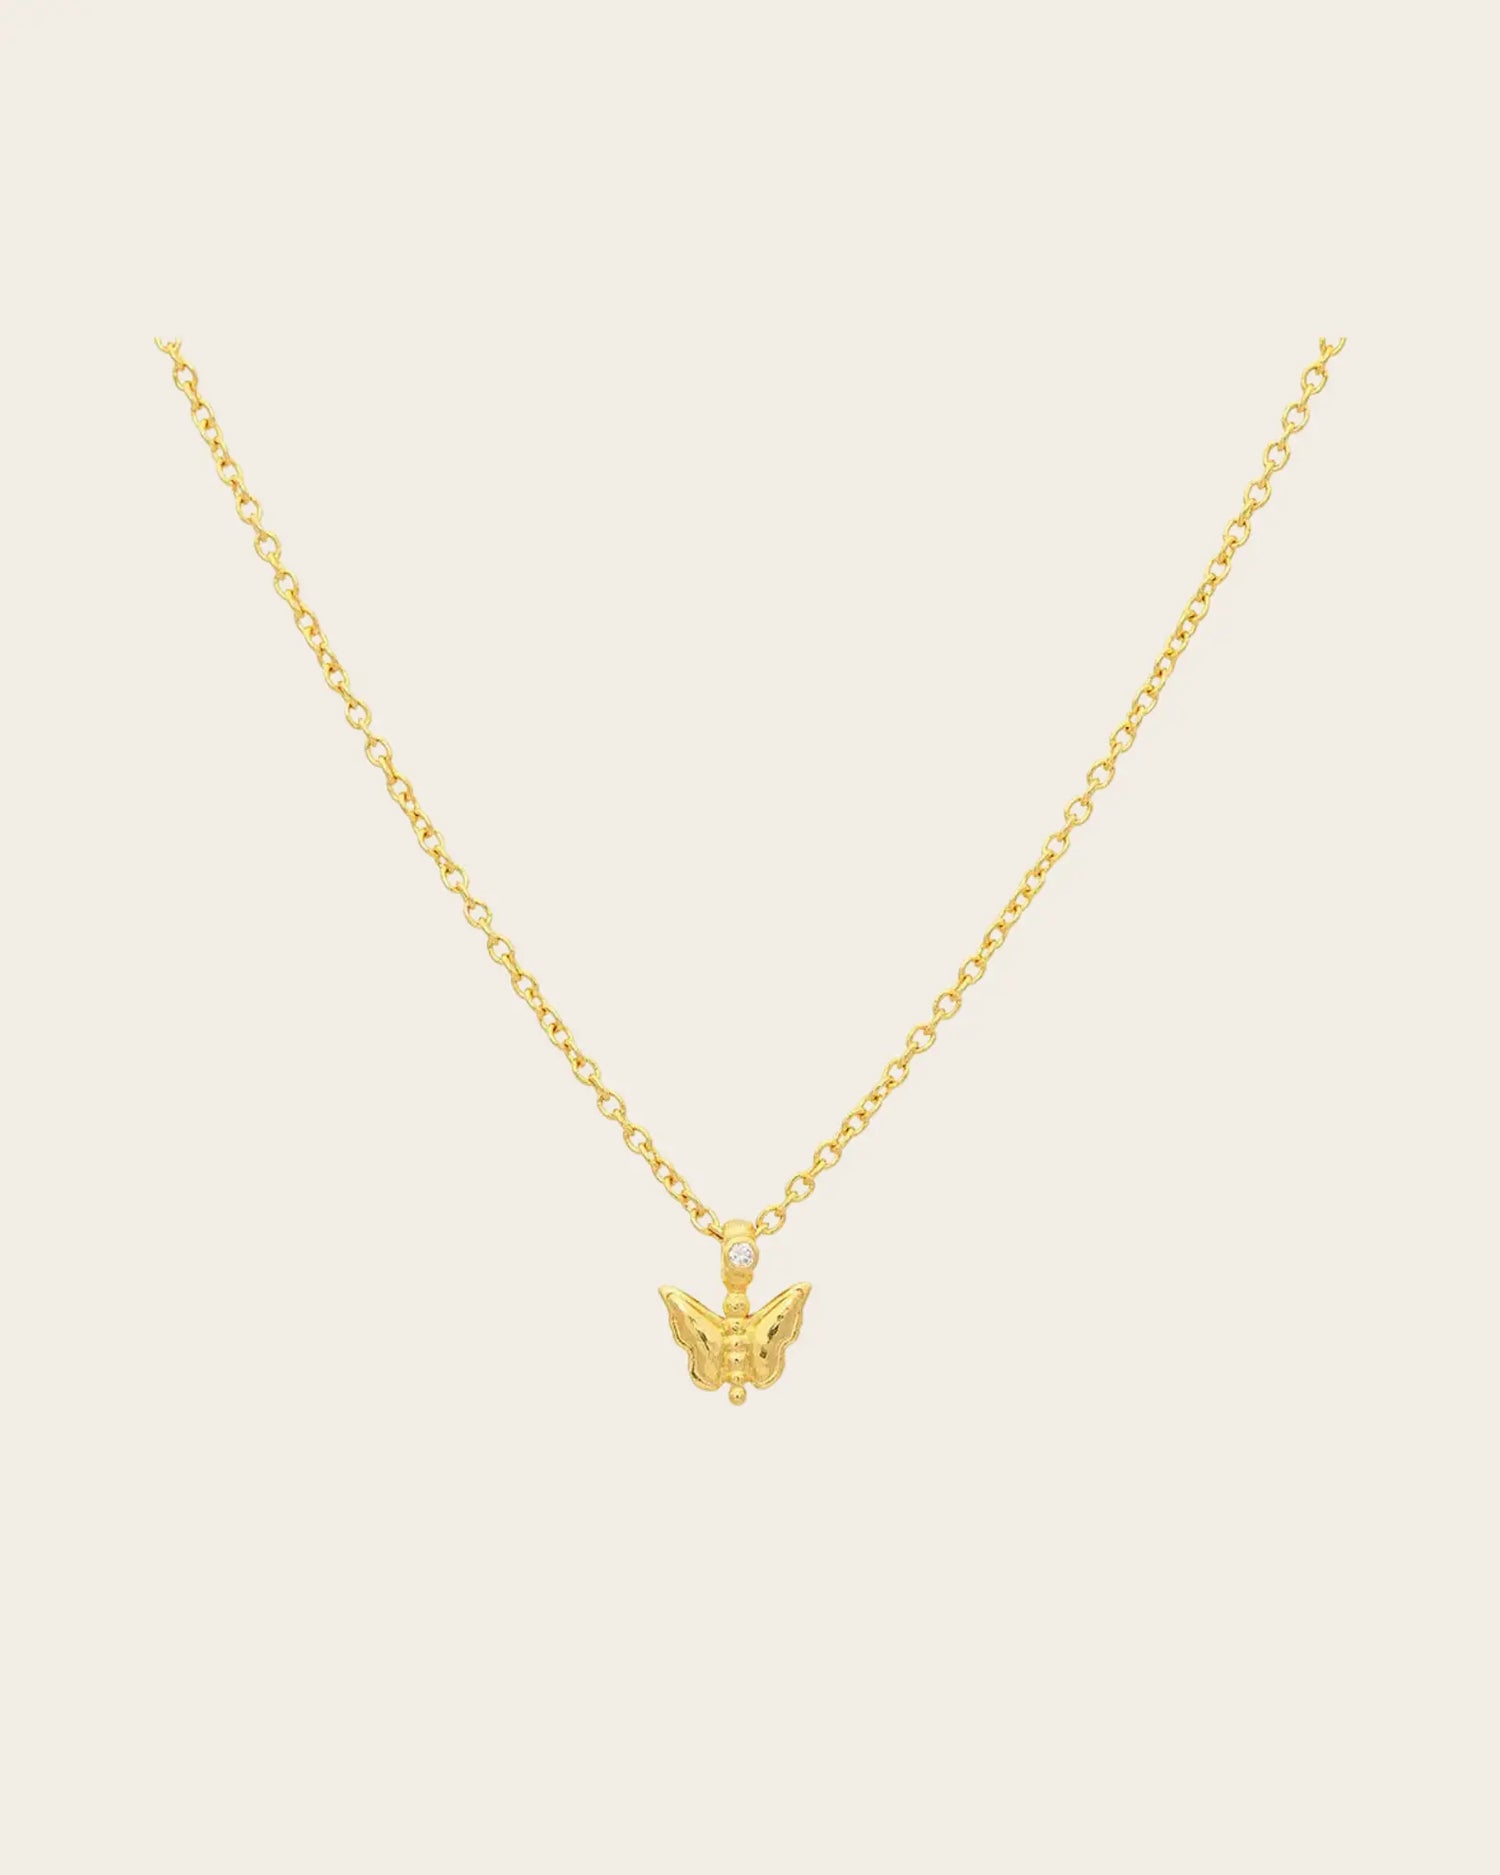 GURHAN Spell Gold Pendant Necklace, Small Butterfly, Diamond GURHAN Spell Gold Pendant Necklace, Small Butterfly, Diamond Gurhan Gurhan  Squash Blossom Vail